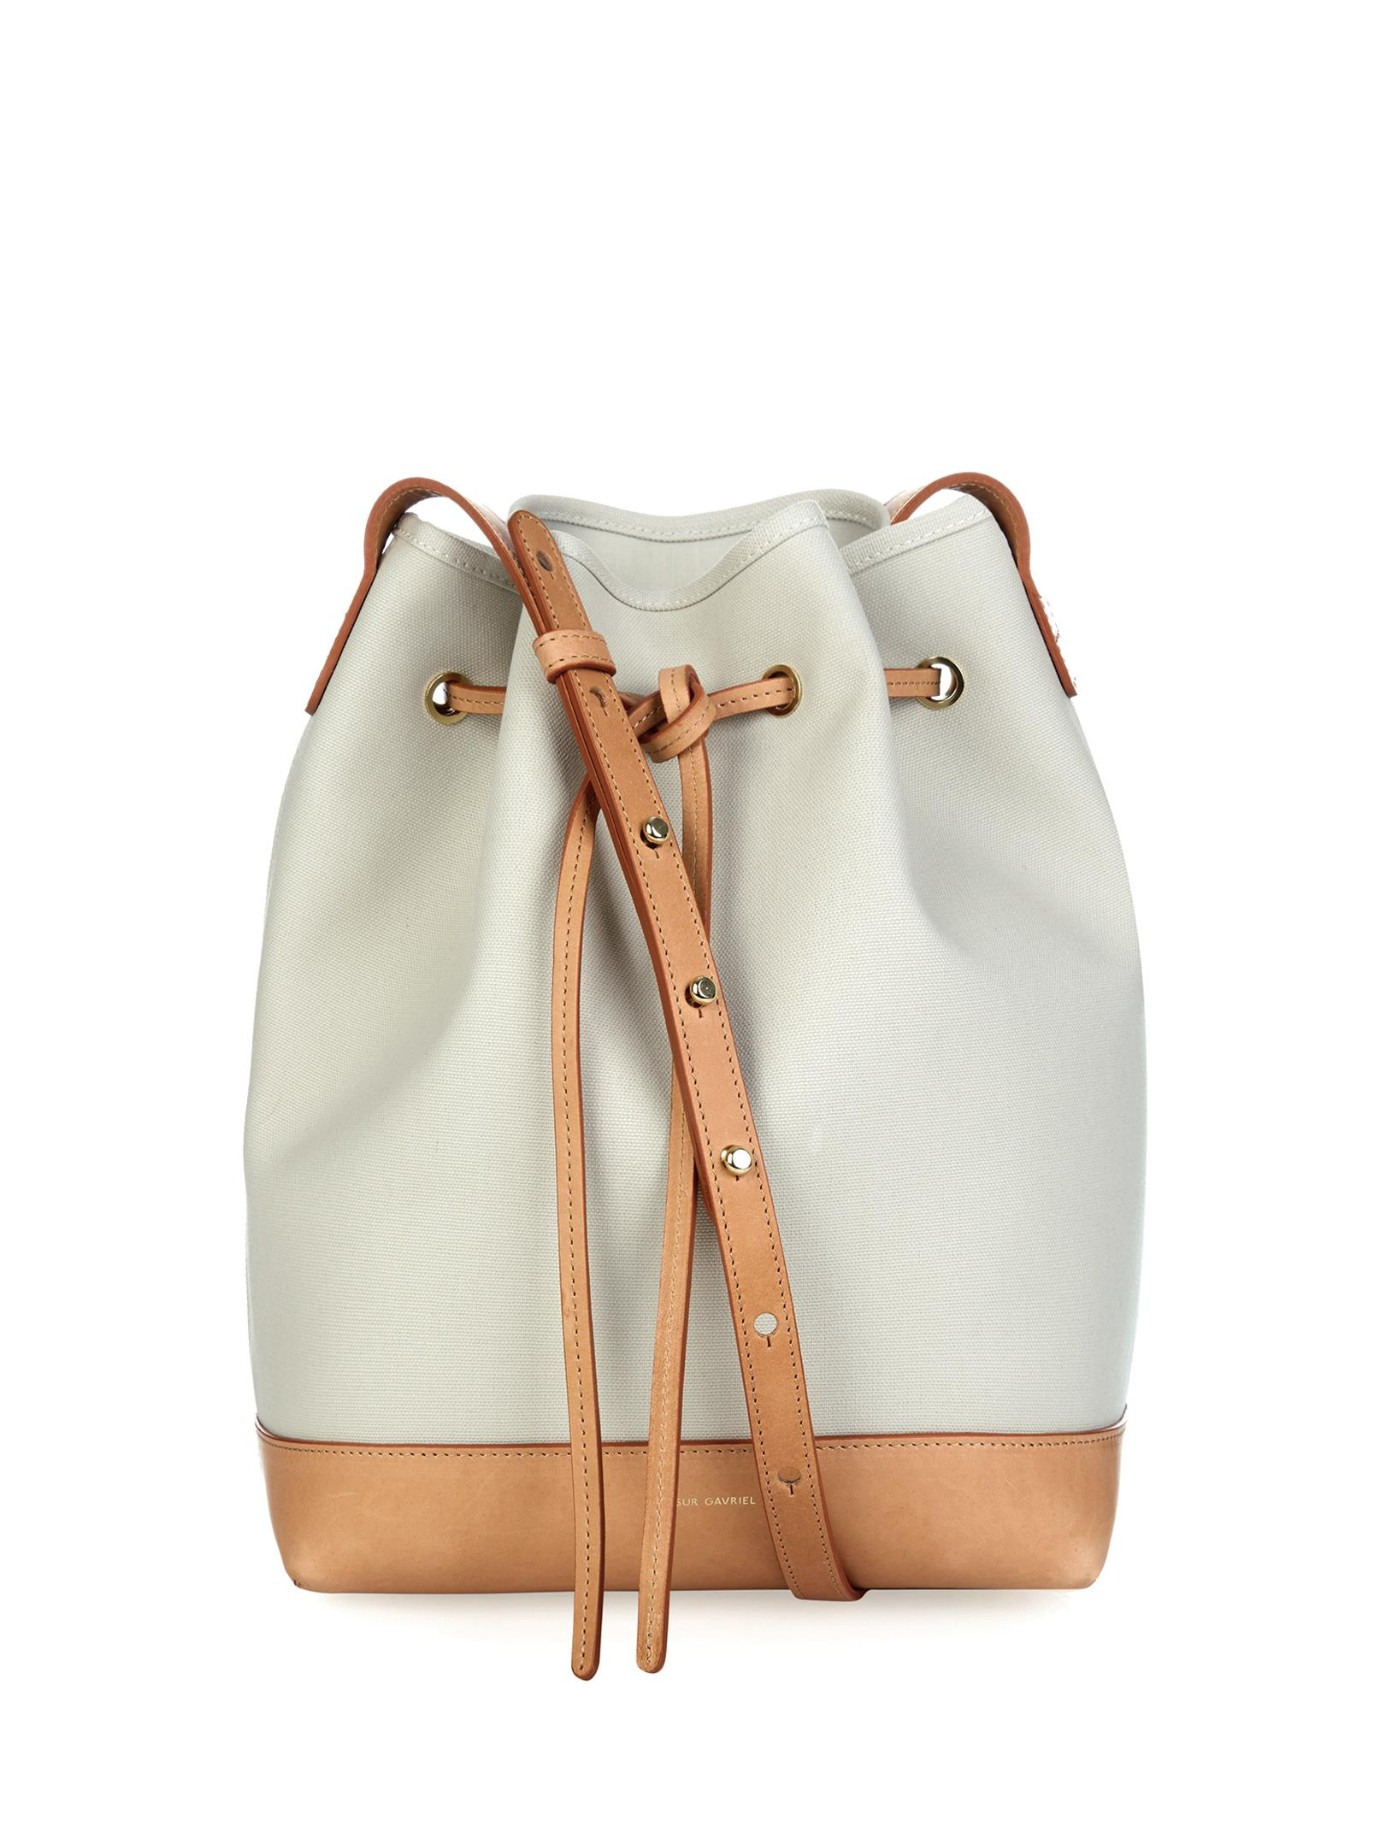 Lyst - Mansur Gavriel Large Canvas And Leather Bucket Bag in White